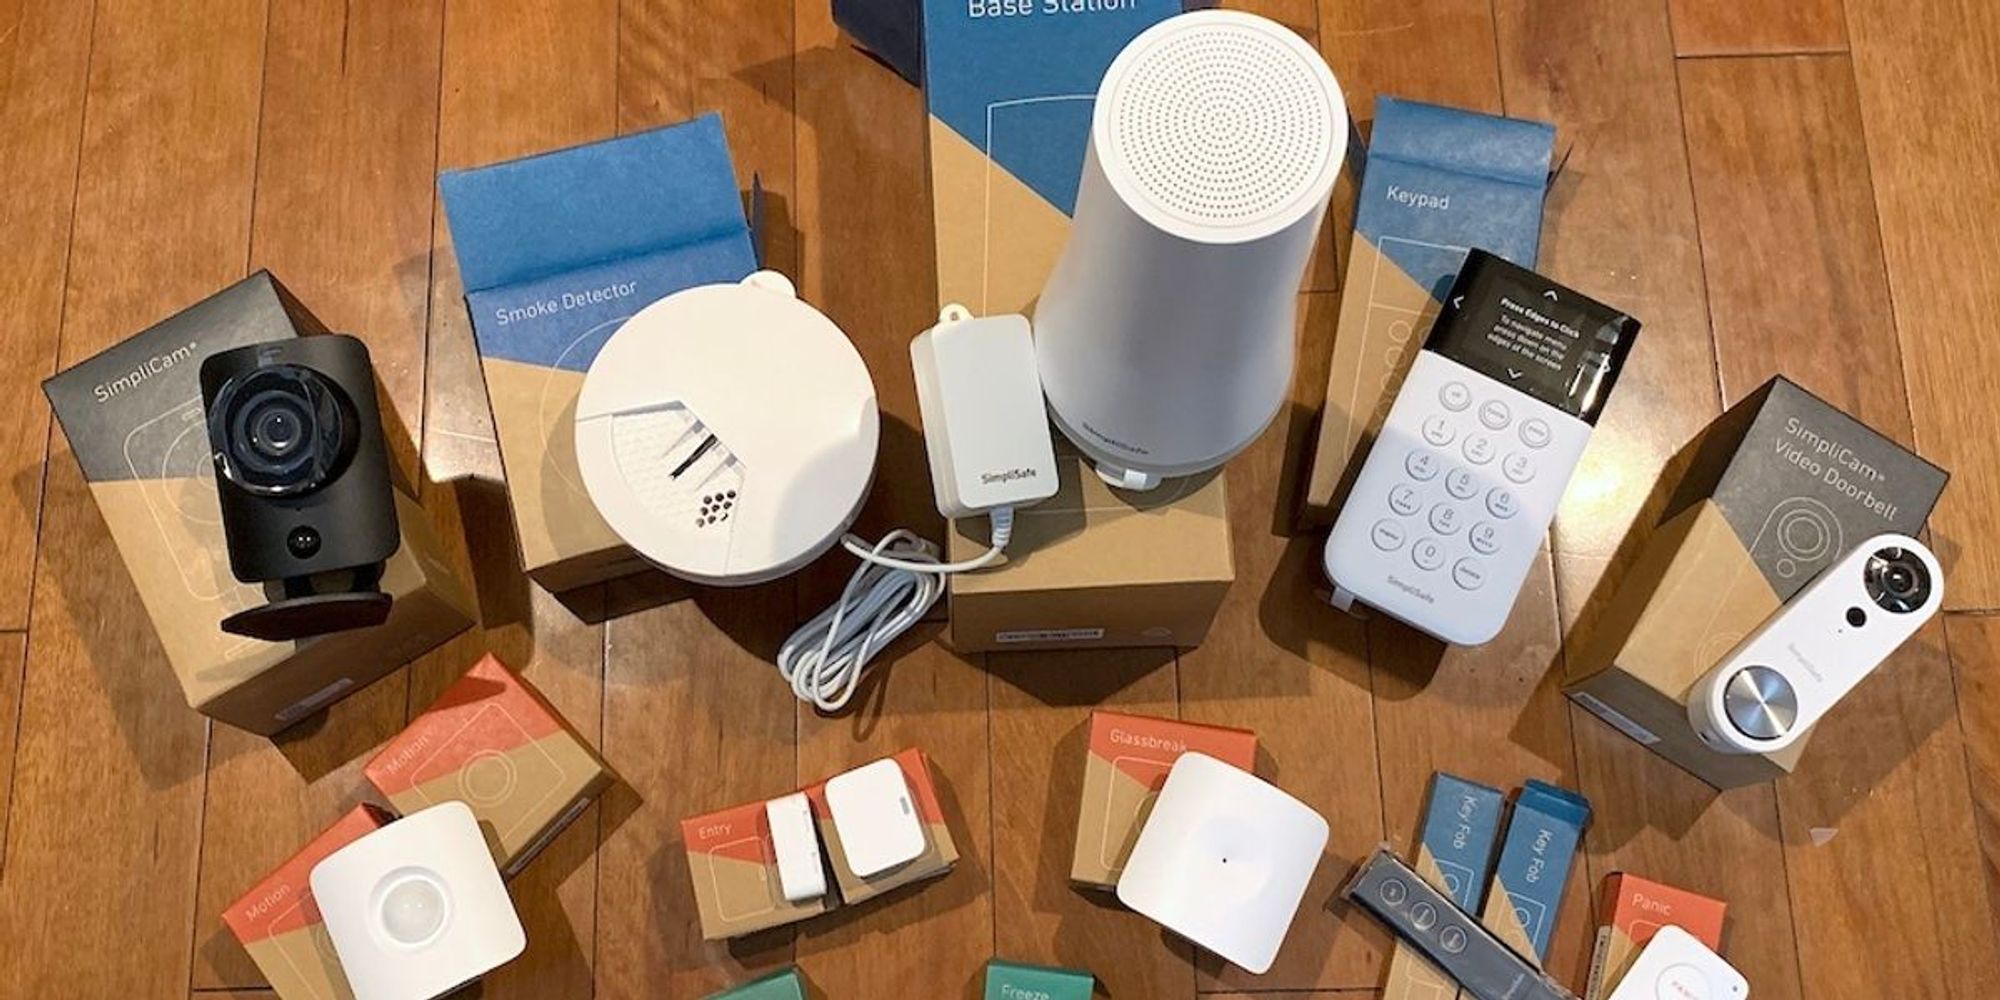 Review: Hands on with the SimpliSafe DIY home security system - Gearbrain